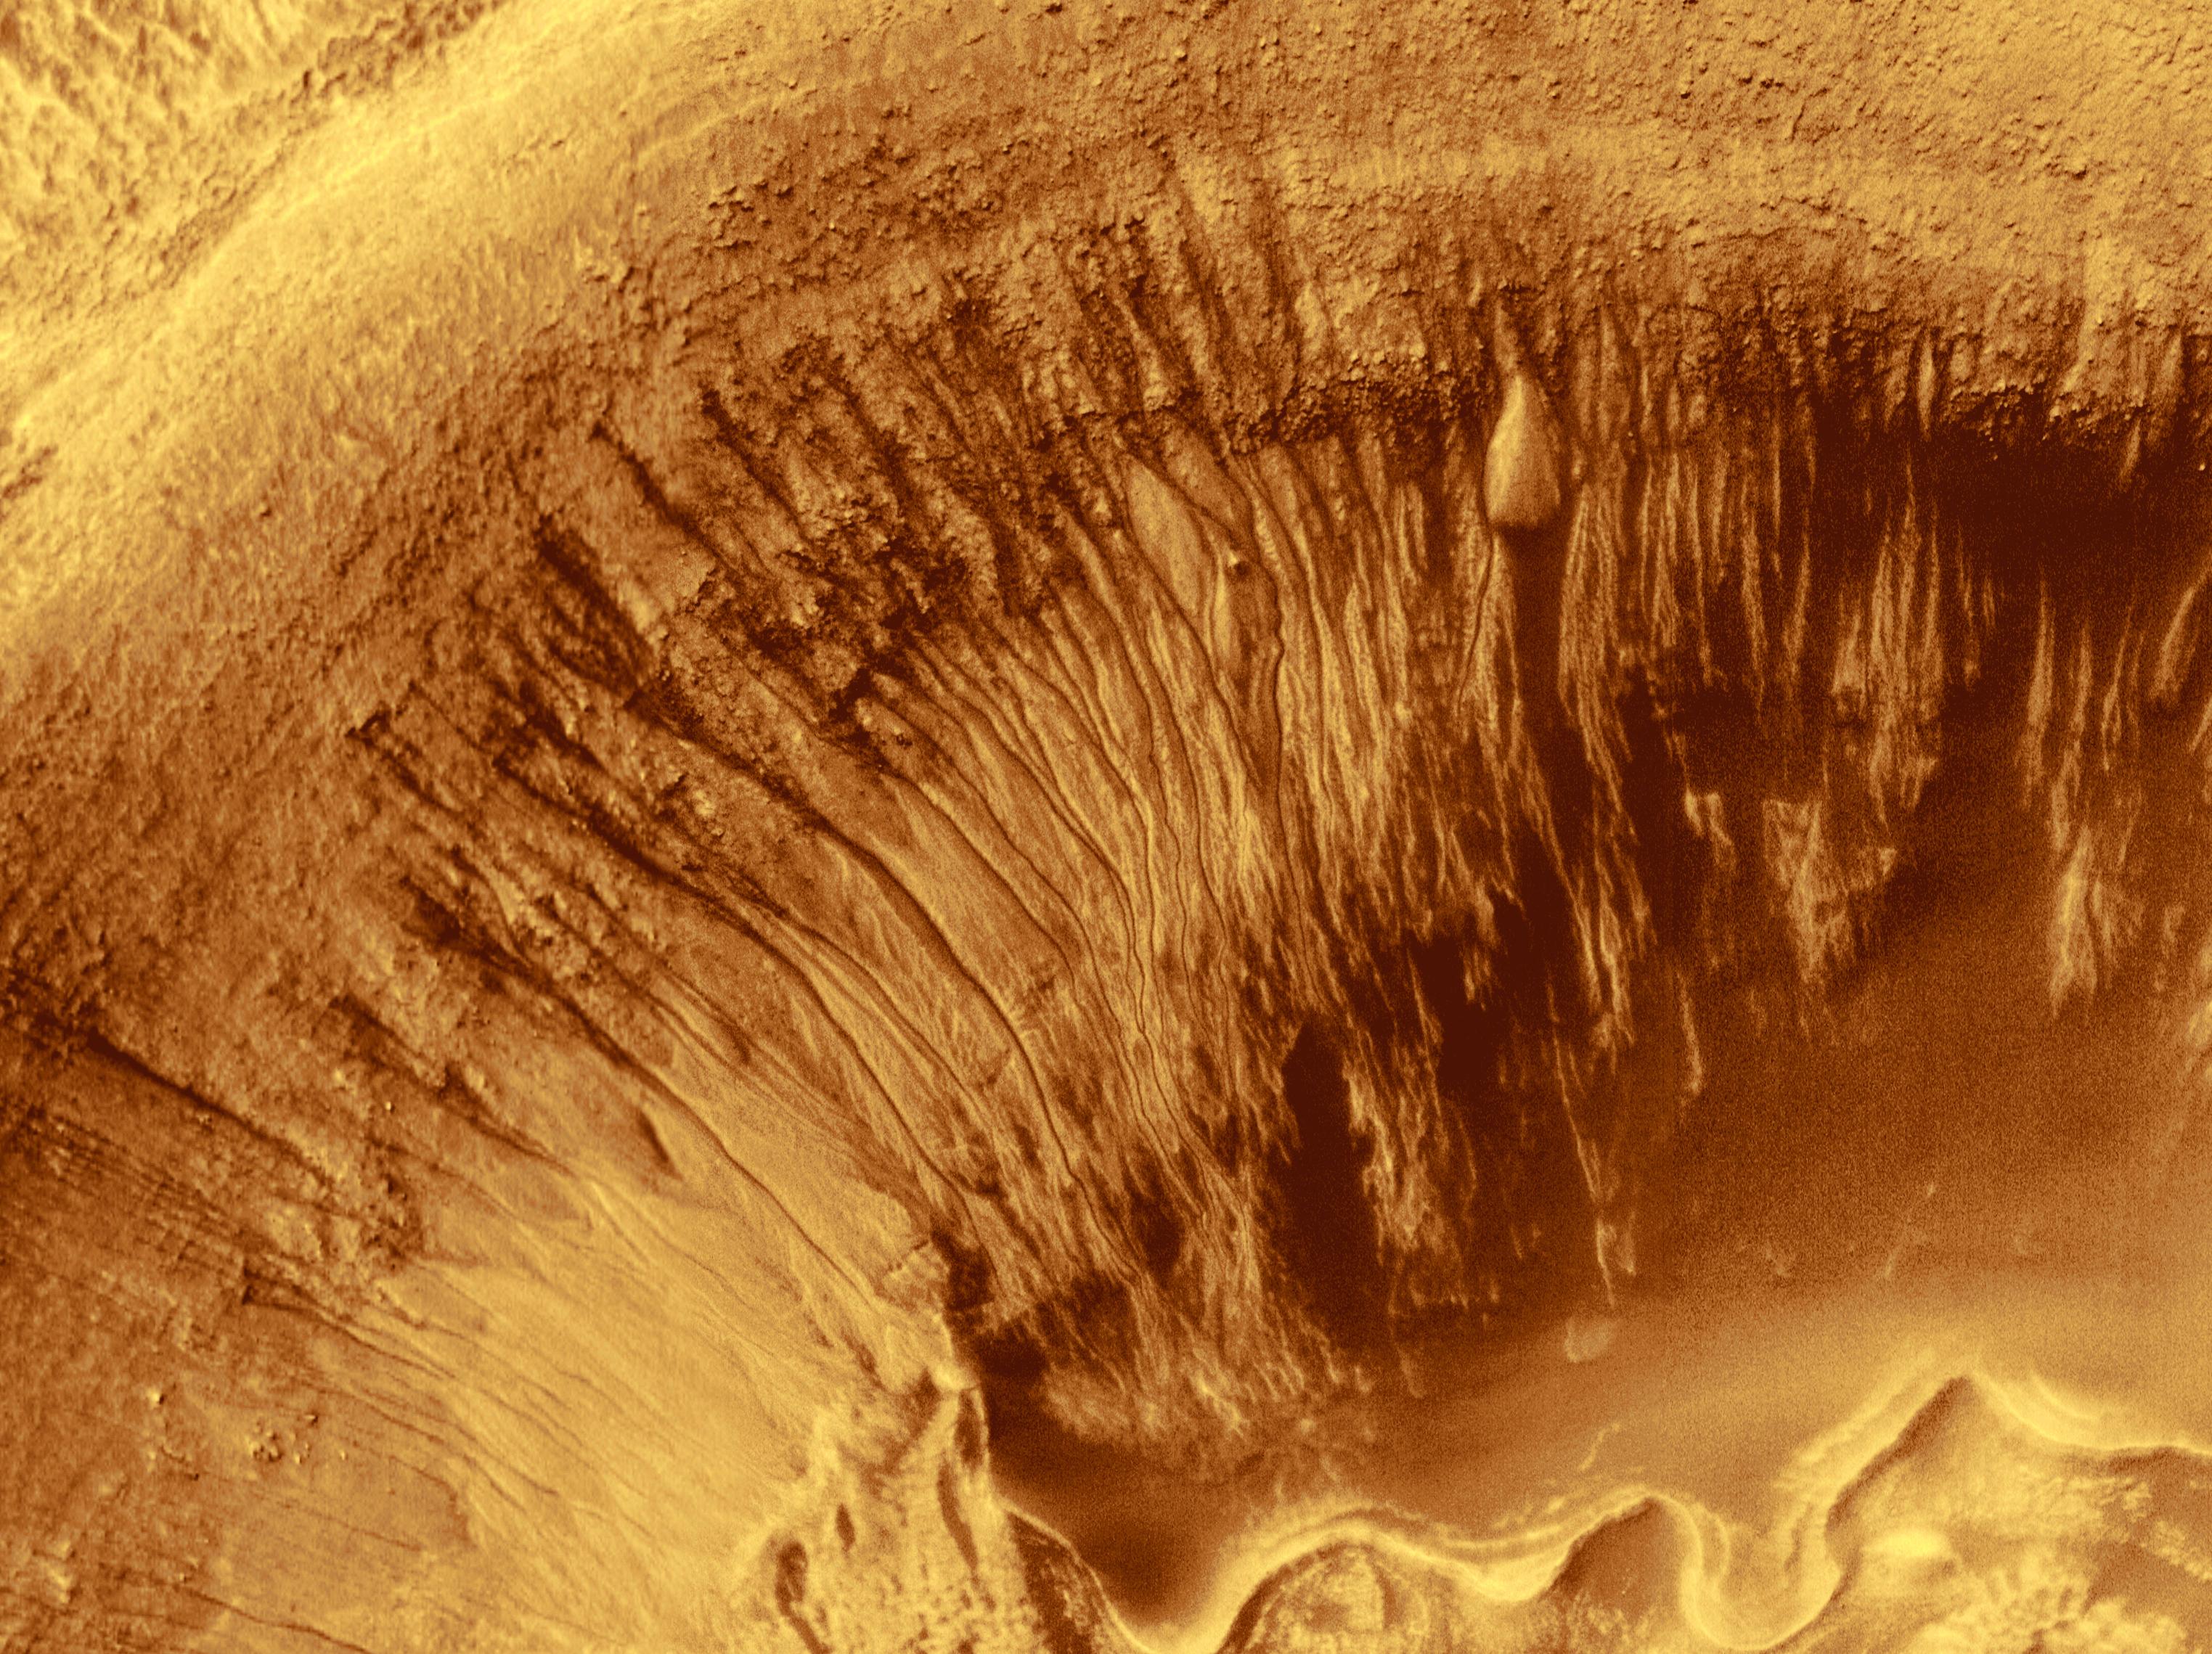 This overhead view of a Martian crater shows the upper-left quarter of the crater – its rim and the walls descending to the floor below. The rim and floor appear as a bright yellow-orange, while the wall is in various darker shades culminating in a deep rust color at the bottom where it meets the wall. The rim is fairly smooth while the walls are grooved with straight and slightly curved lines until they meet the crater floor, making the scene look like the underside of a mushroom. The crater floor is somewhat uneven, highlighted by a ribbon of bright yellowish-orange terrain, undulating from the middle of the bottom frame of the image toward the right edge of the frame, where it ends at in the lower quarter.